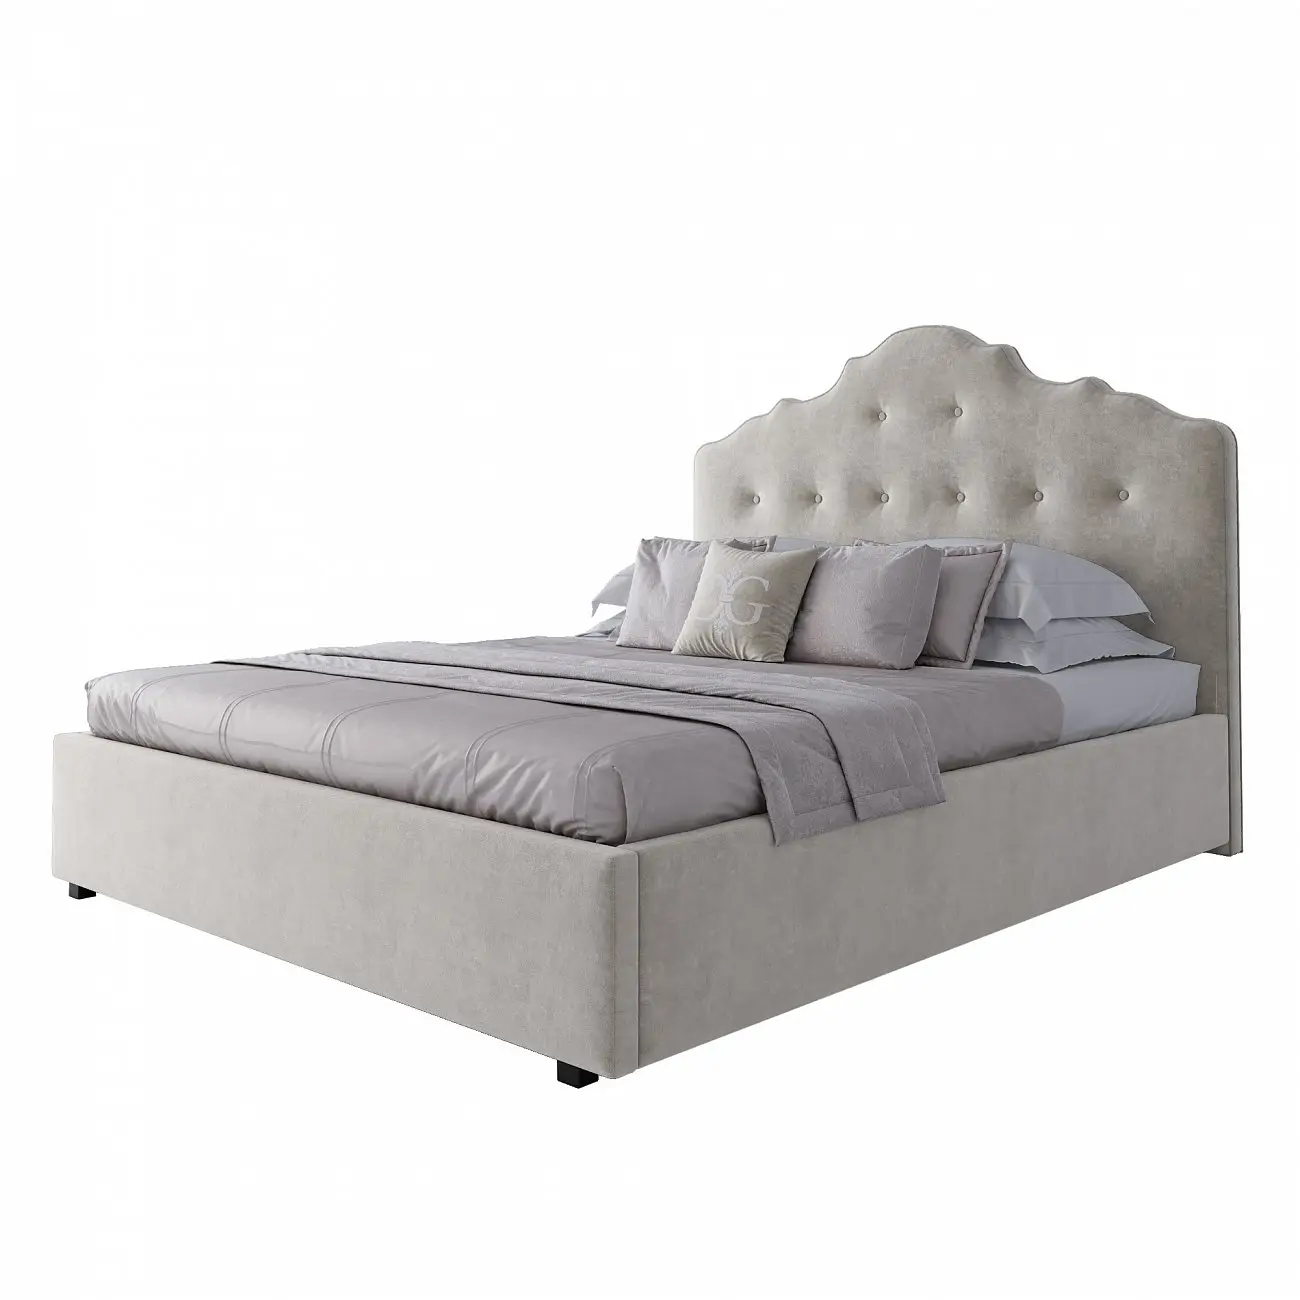 Double bed with black legs 160x200 cm milk Palace